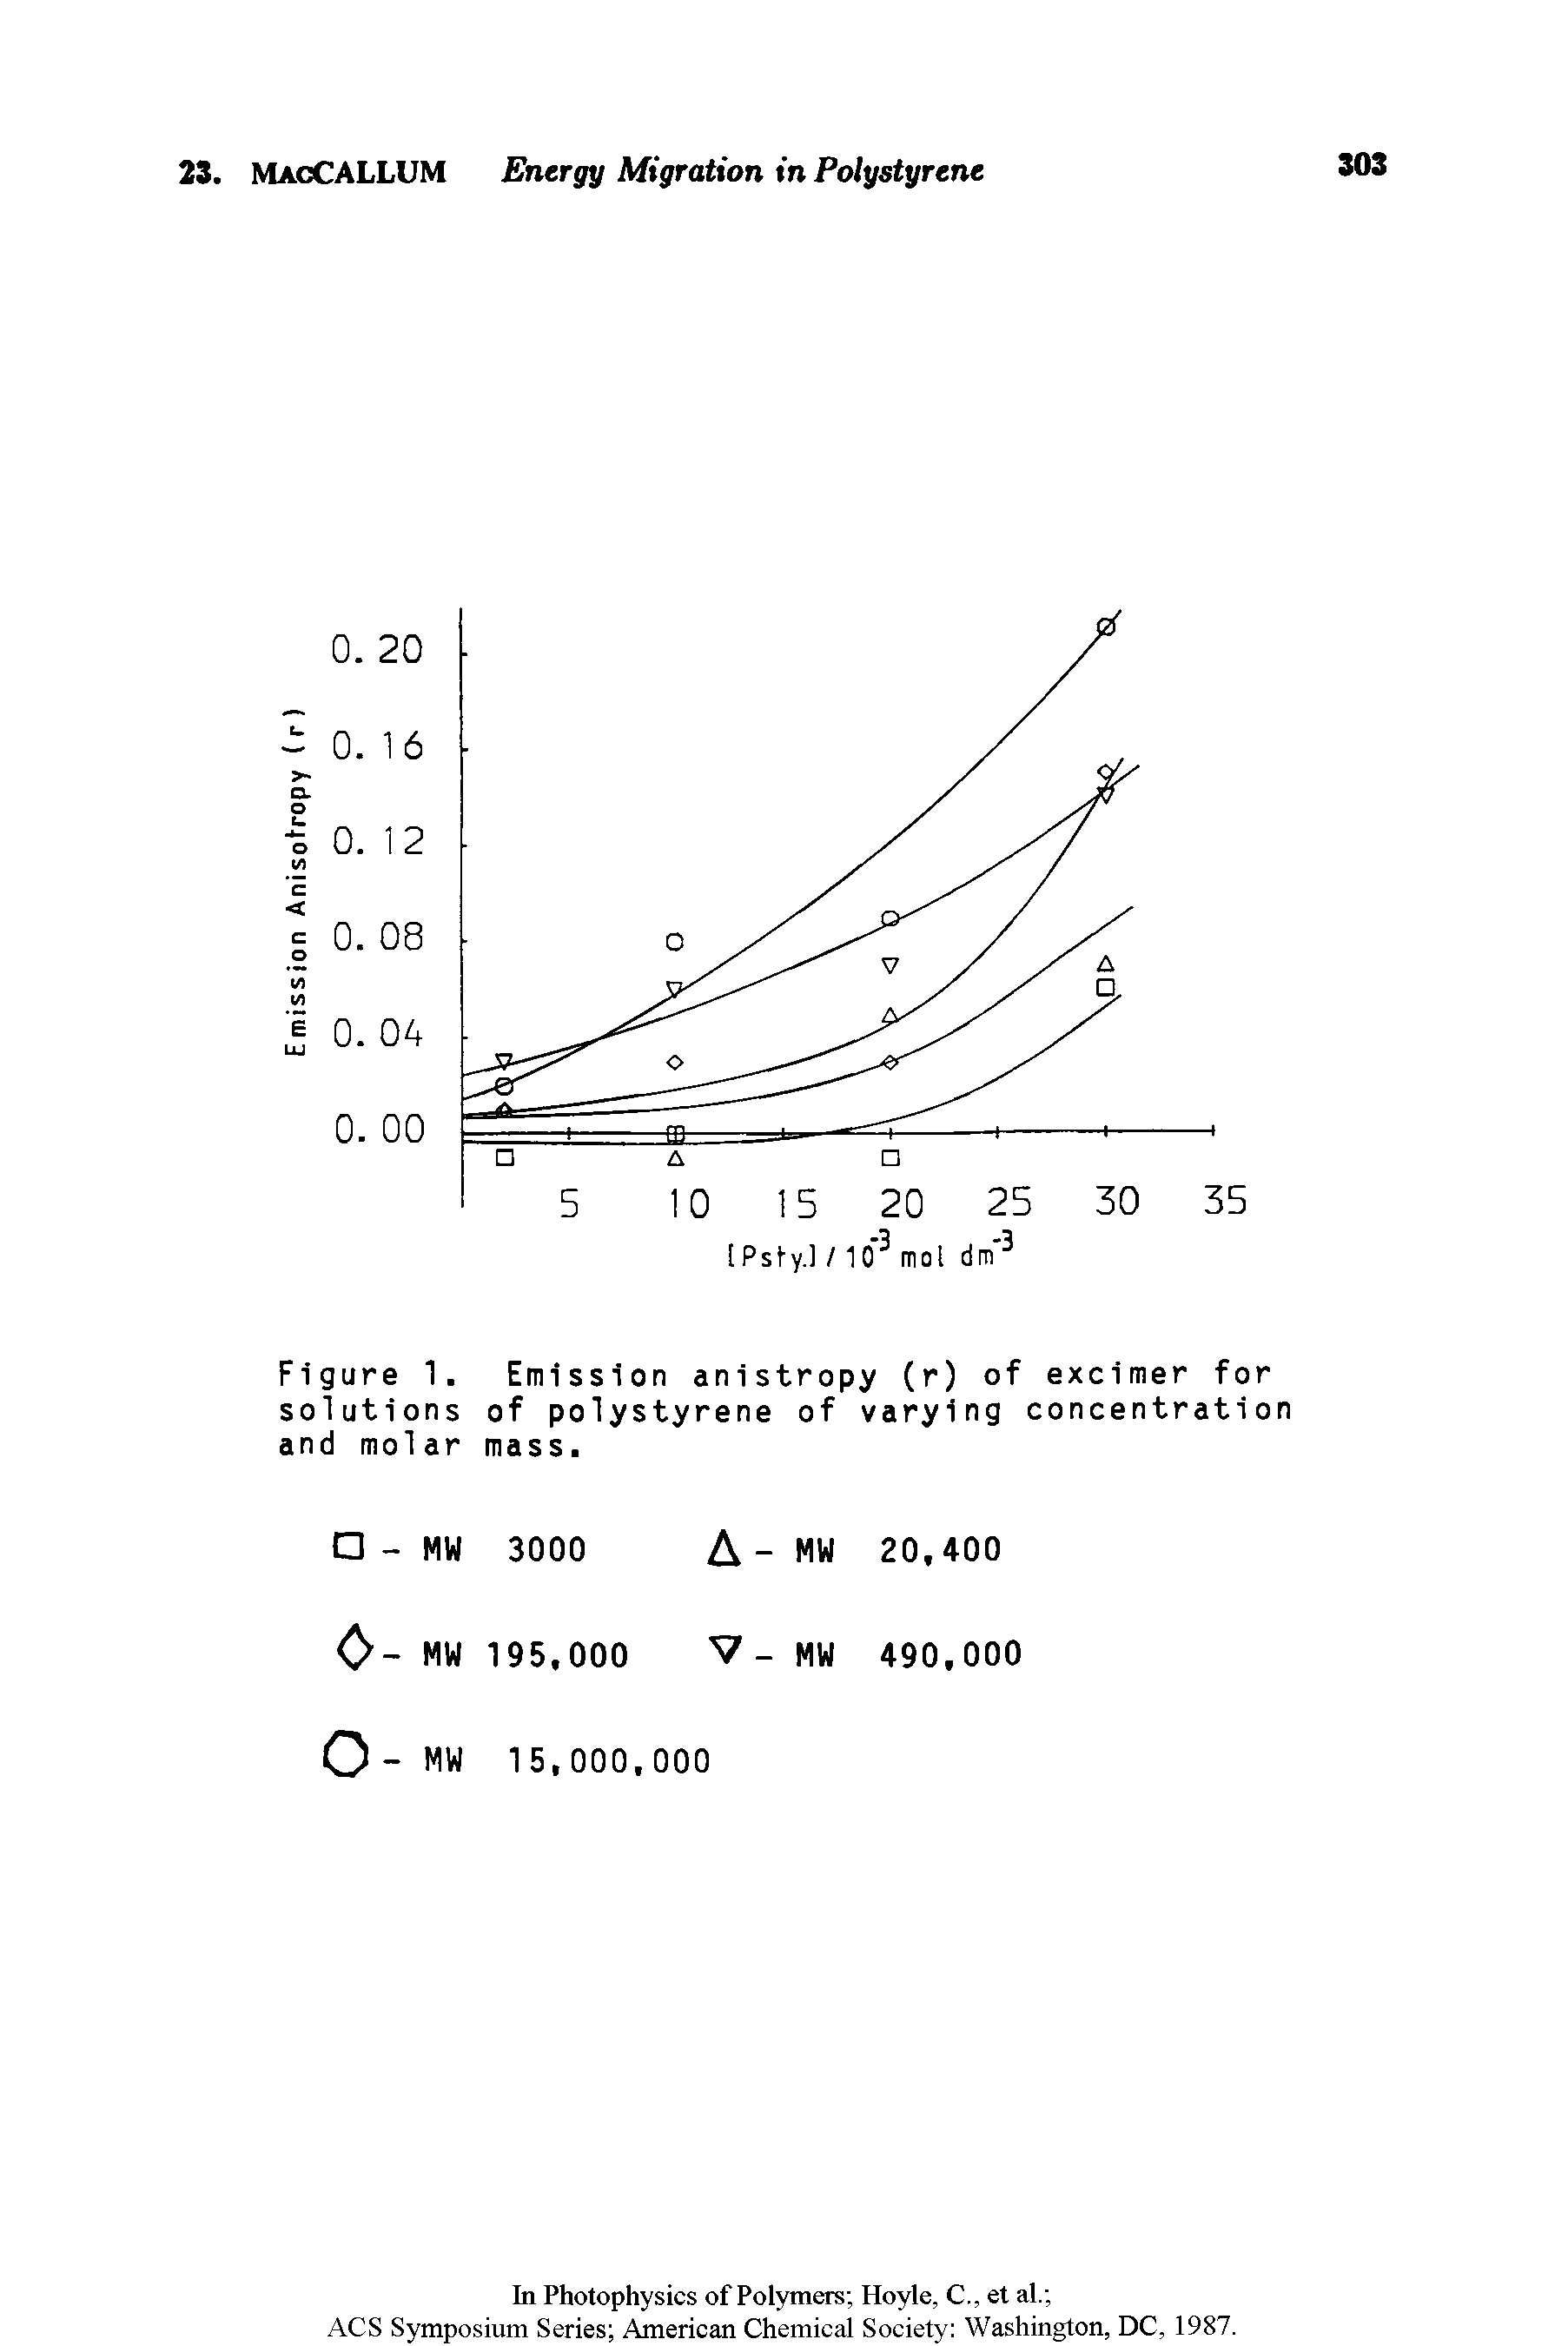 Figure 1. Emission anistropy (r) of excimer for solutions of polystyrene of varying concentration and molar mass.